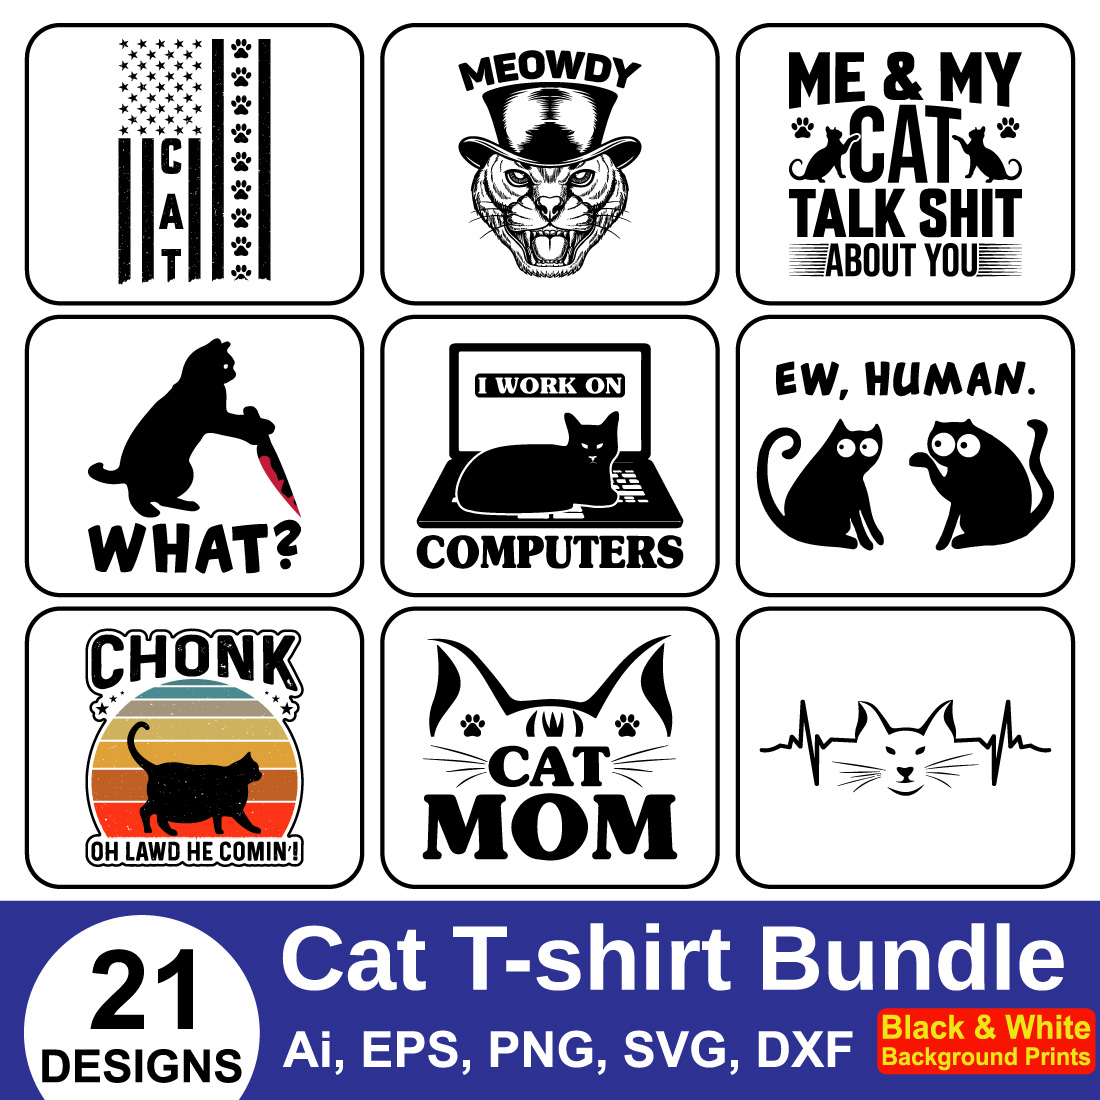 Funny Cat Lover Typography T-Shirt Design cover image.